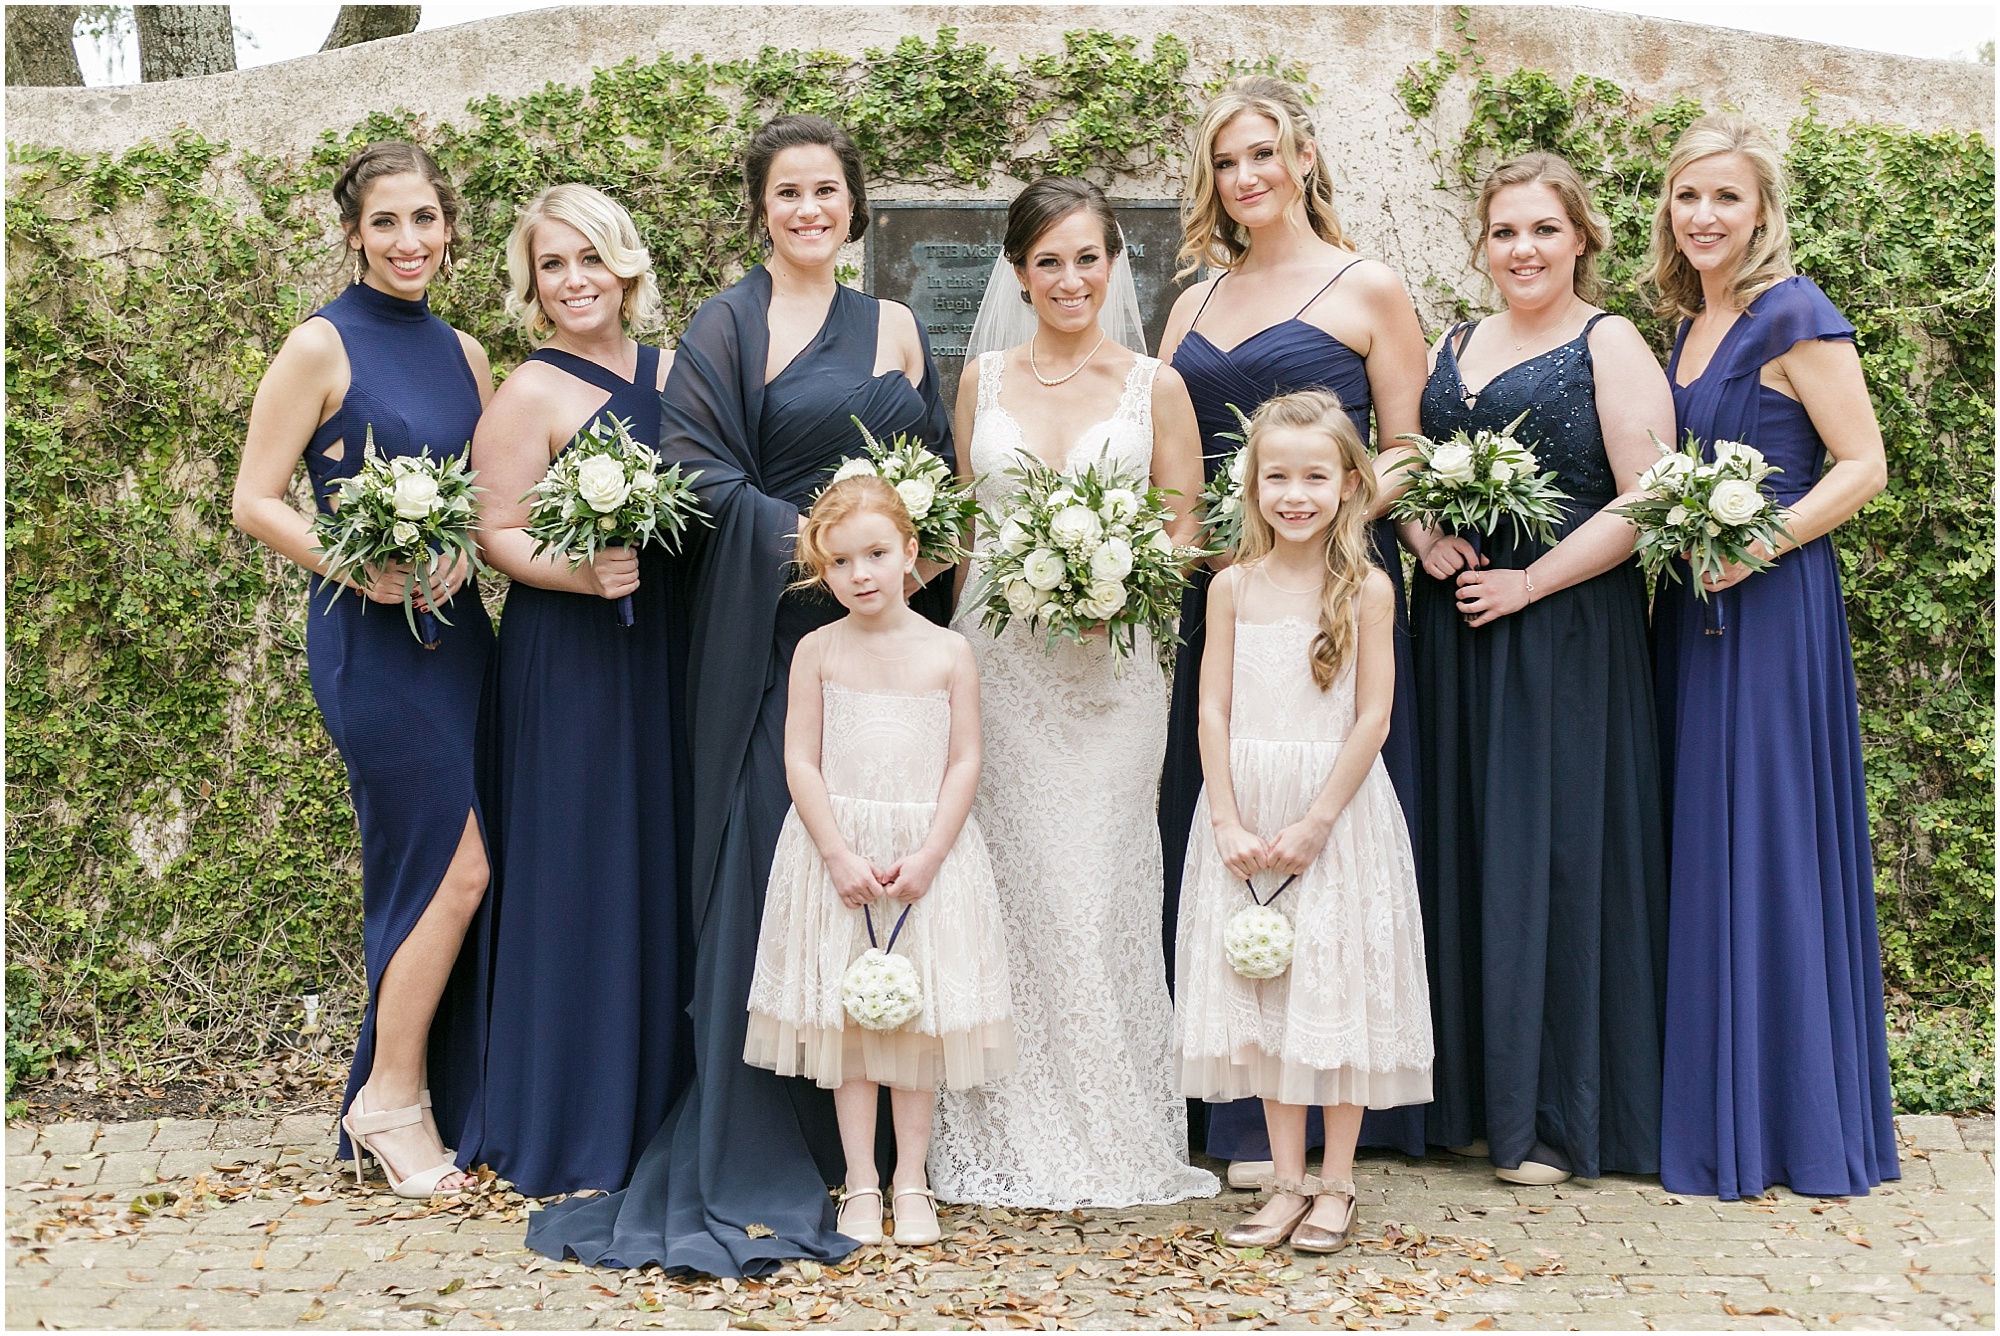 Bride and her entire bridal party dressed in blue.